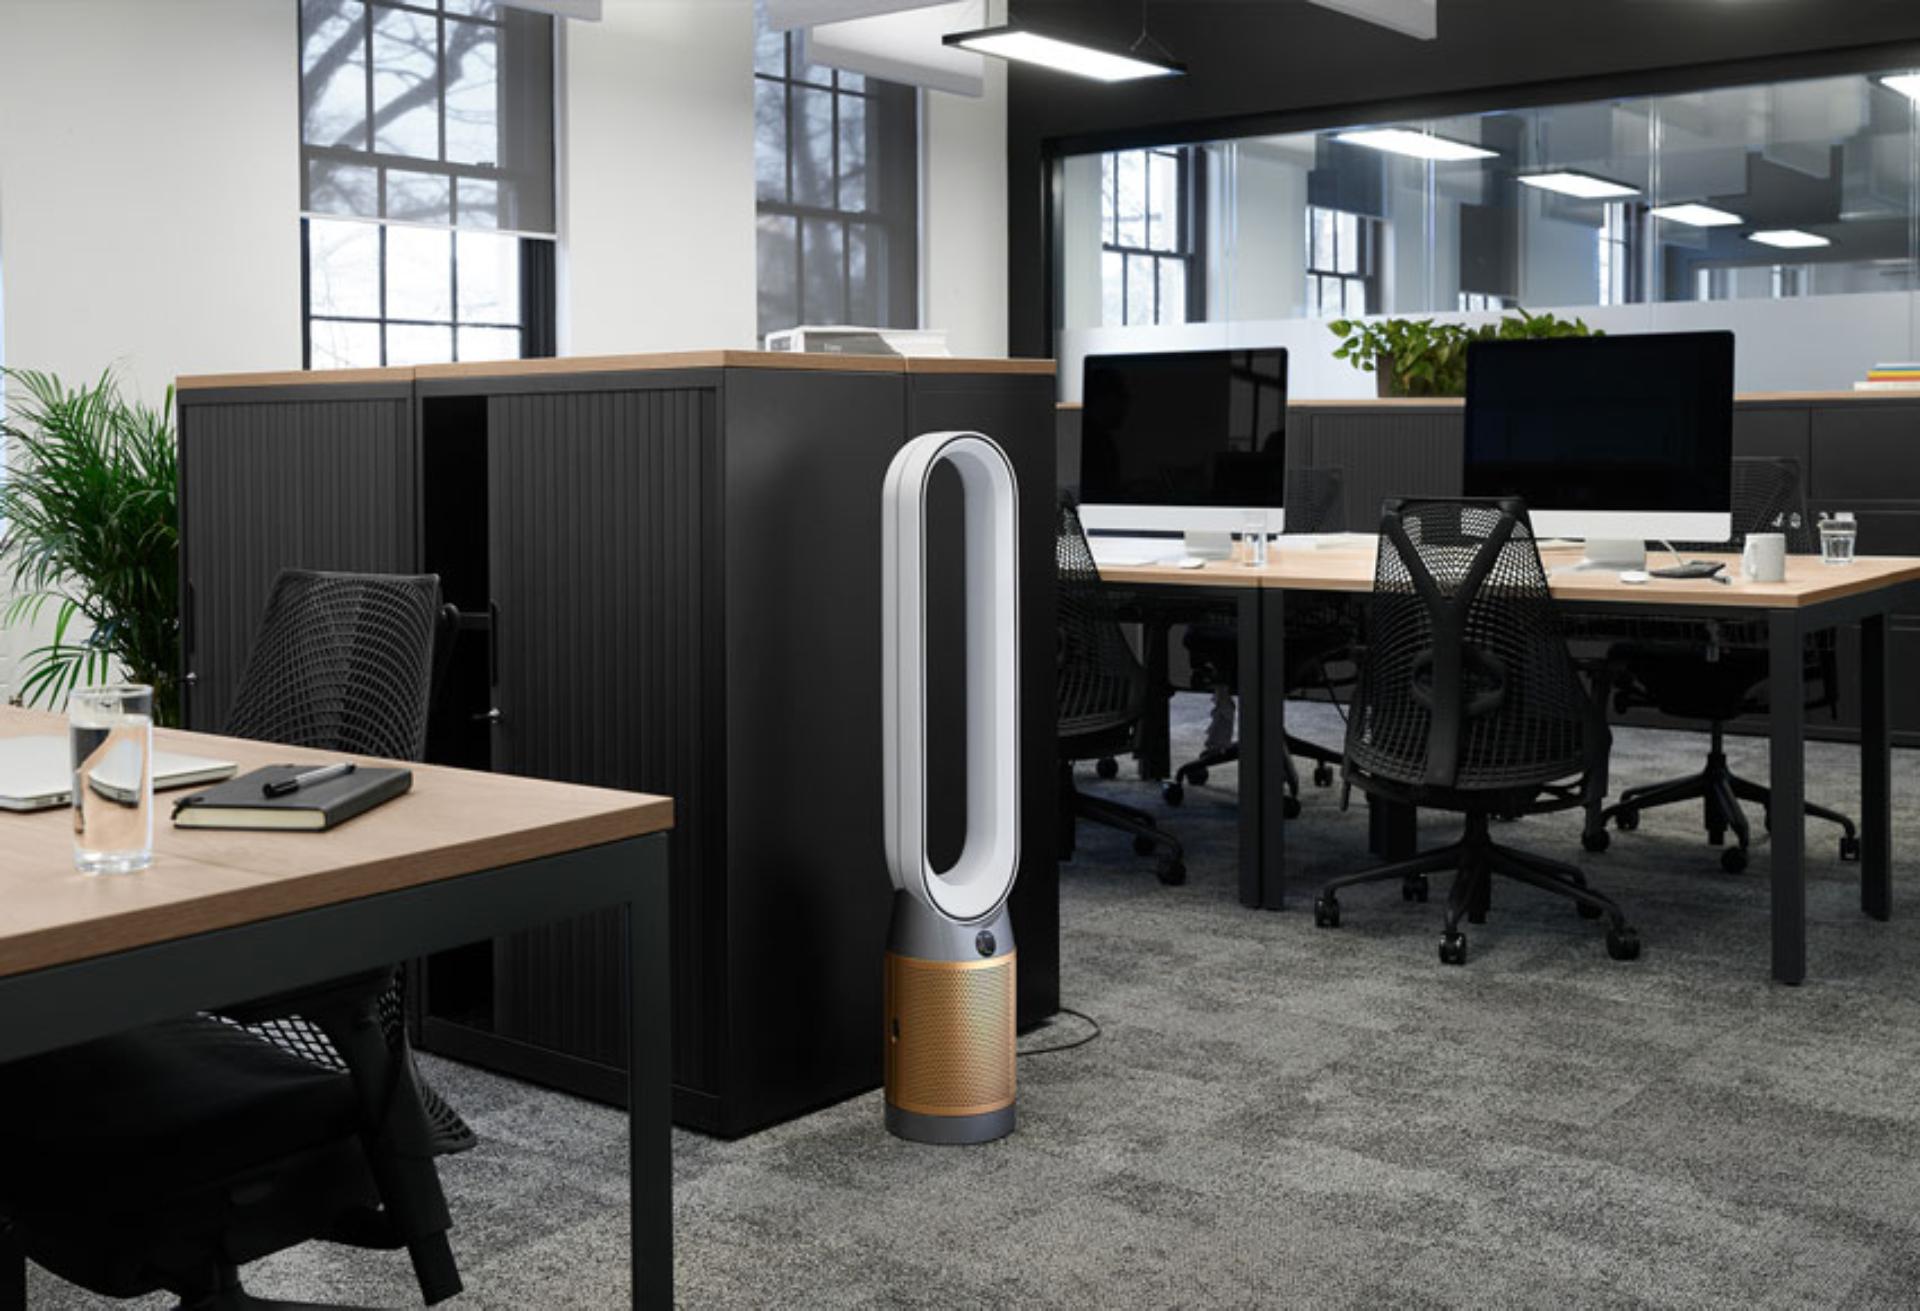 Dyson machines in office setting